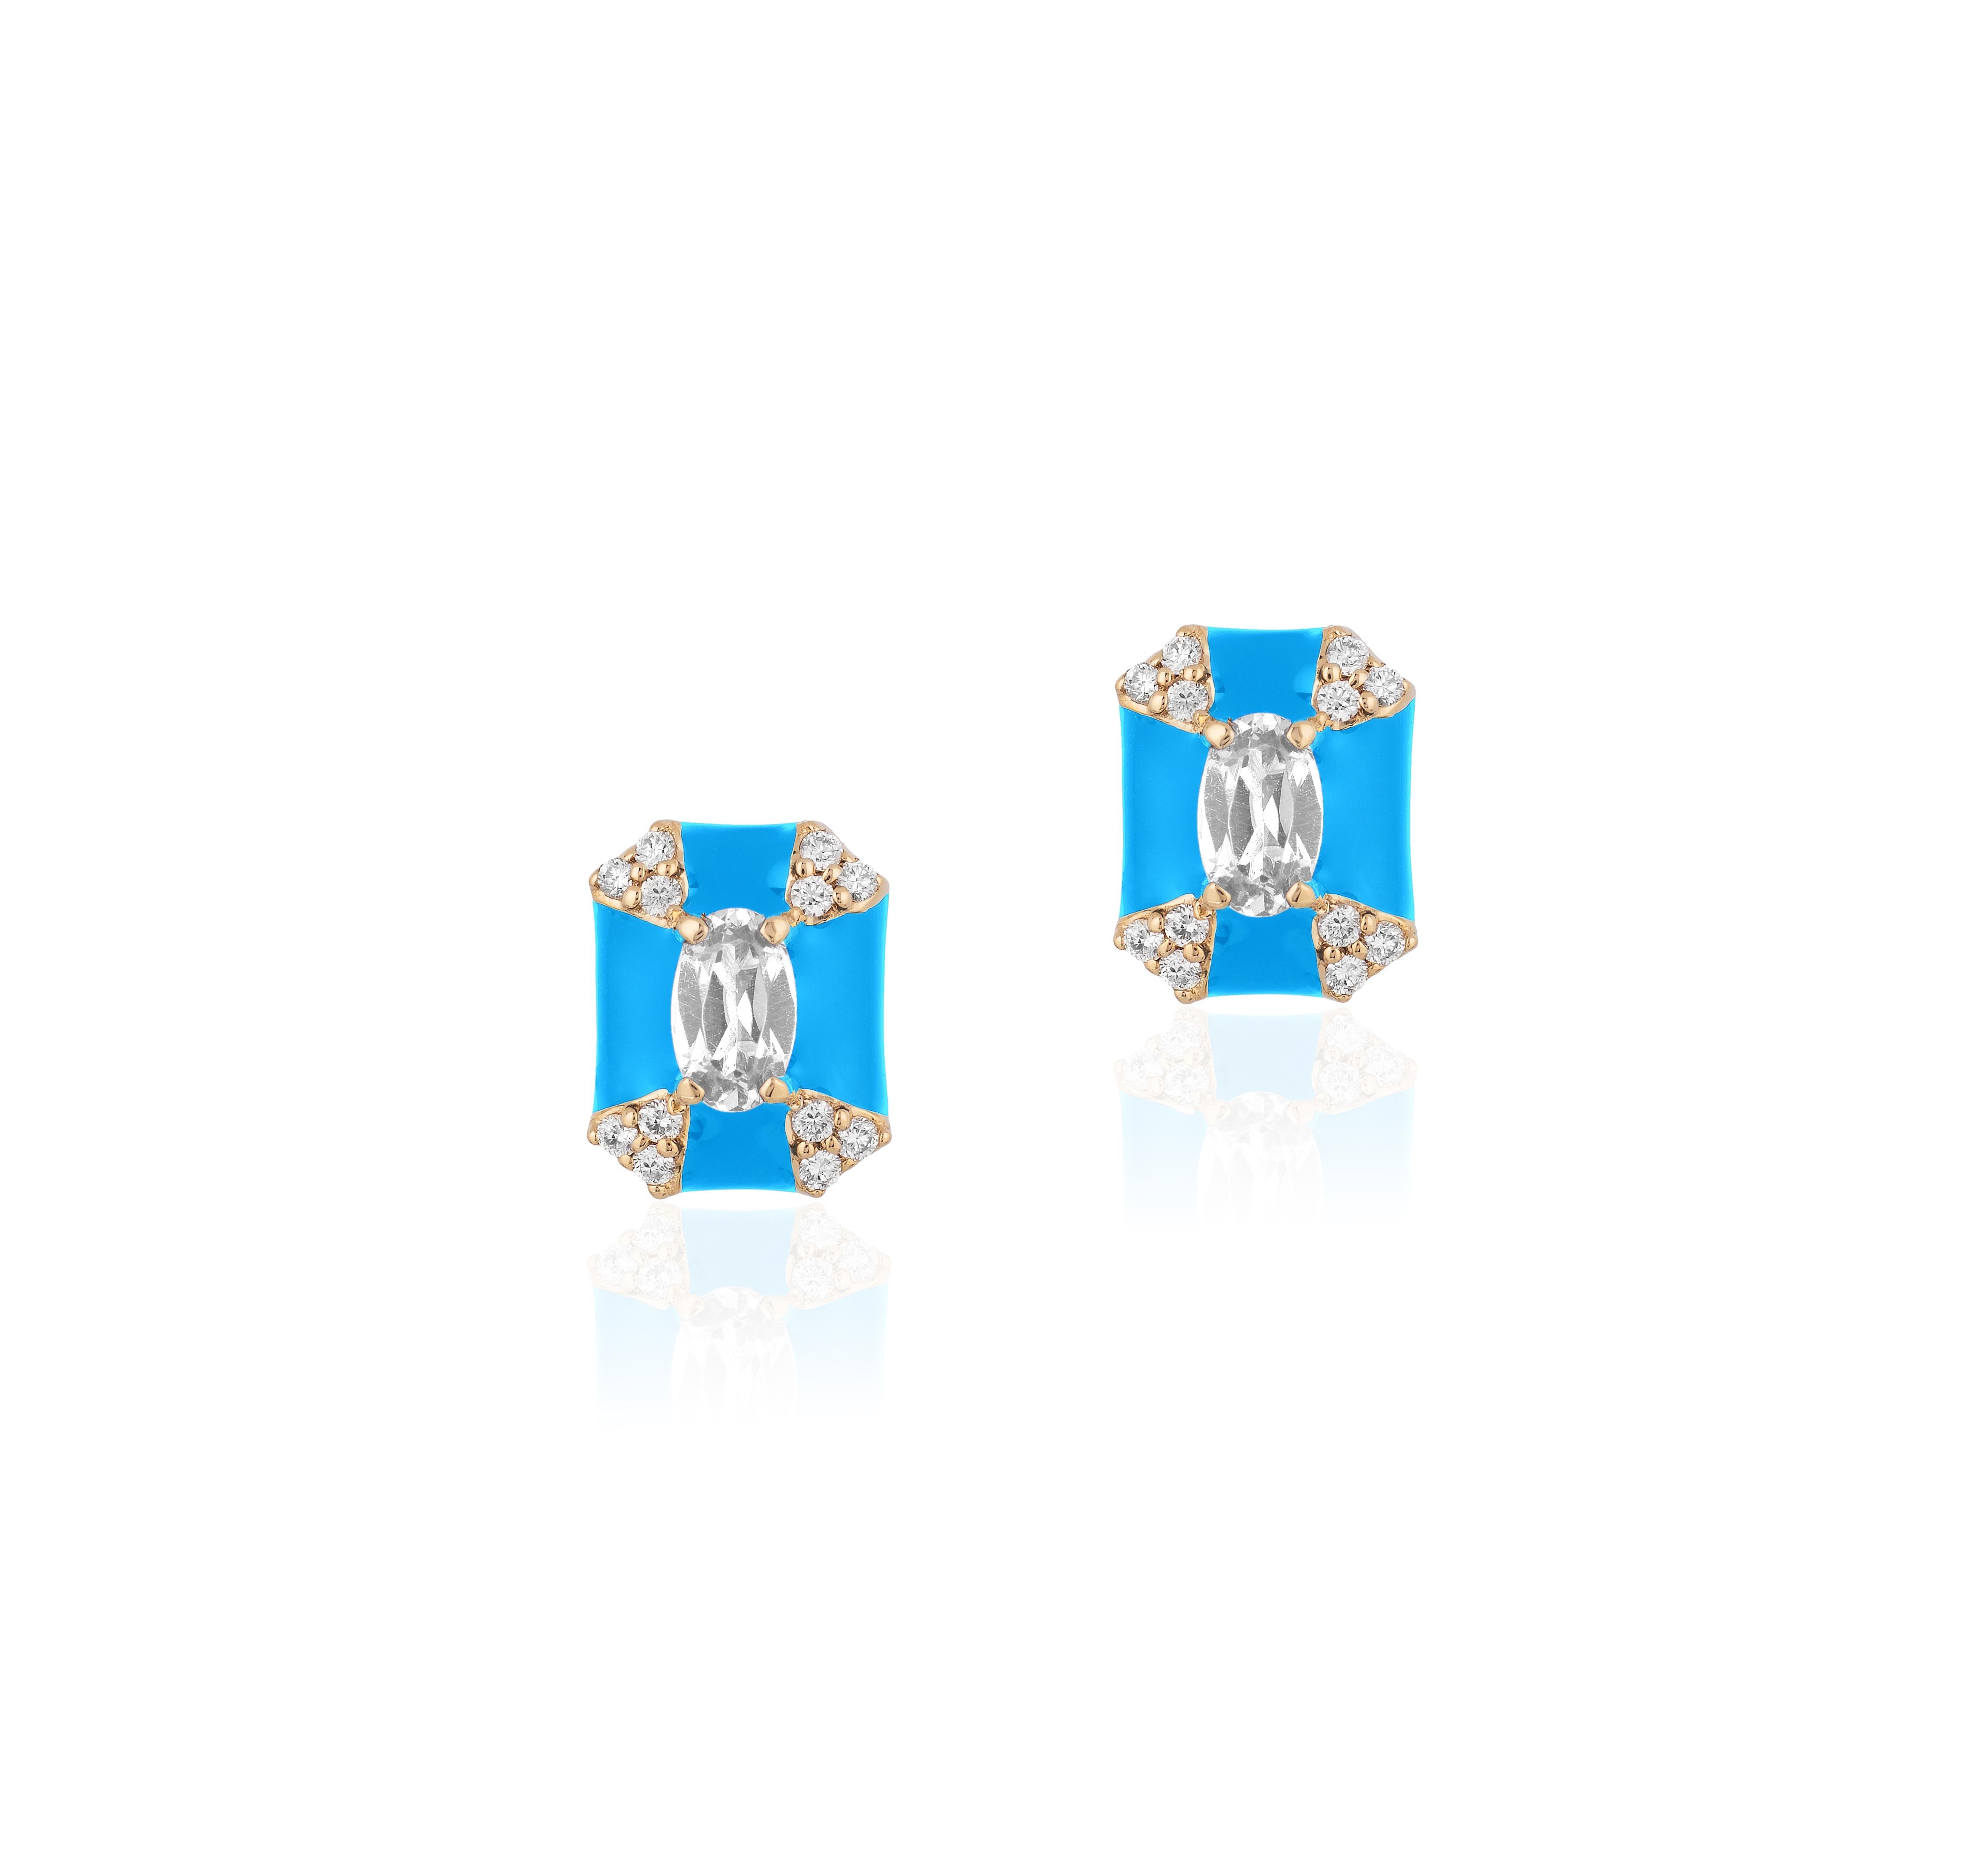 Turquoise Enamel Stud Earrings with Diamonds in 18K Yellow Gold. From 'Queen' Collection
Diamonds: G-H/ VS; Approx. Wt: 0.62 Carats